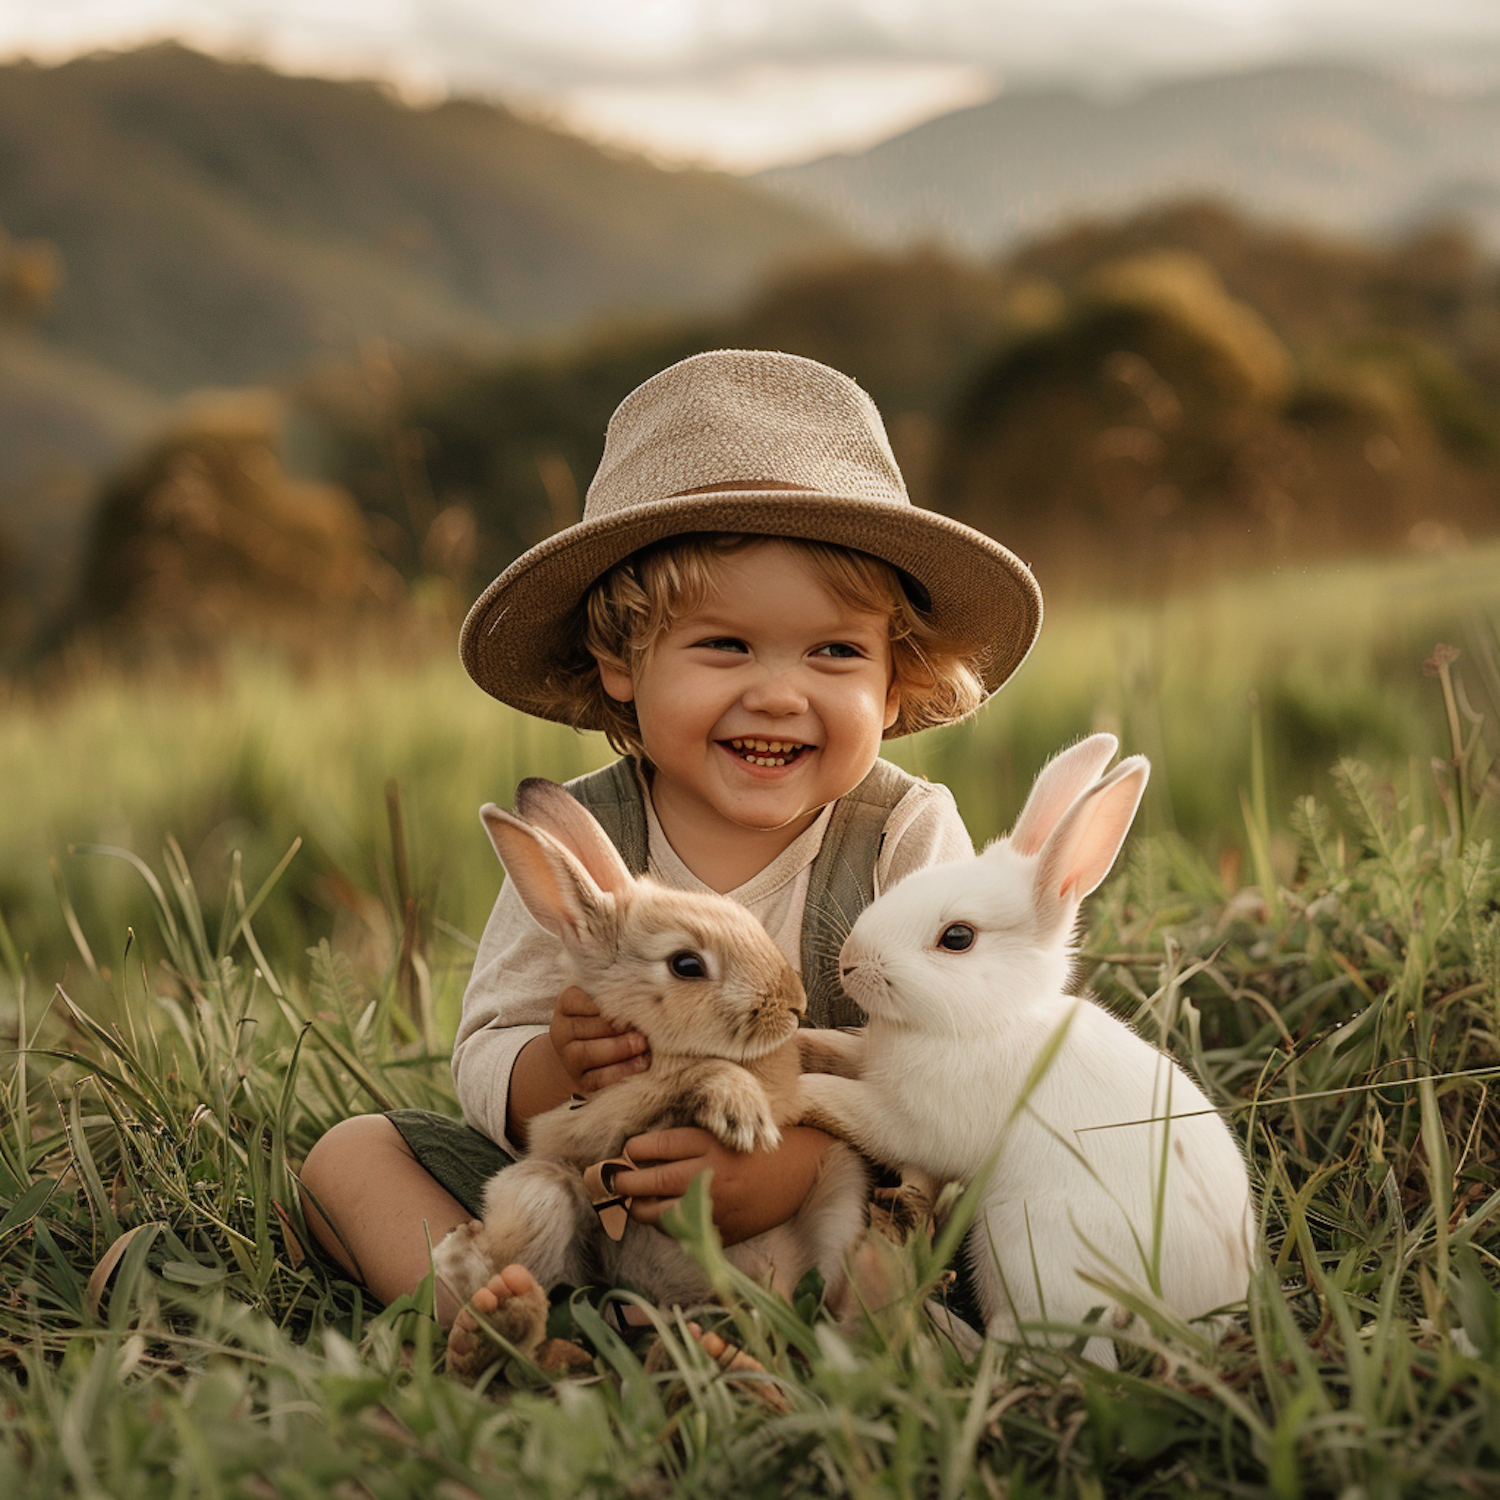 Joyful Child with Rabbits in Meadow